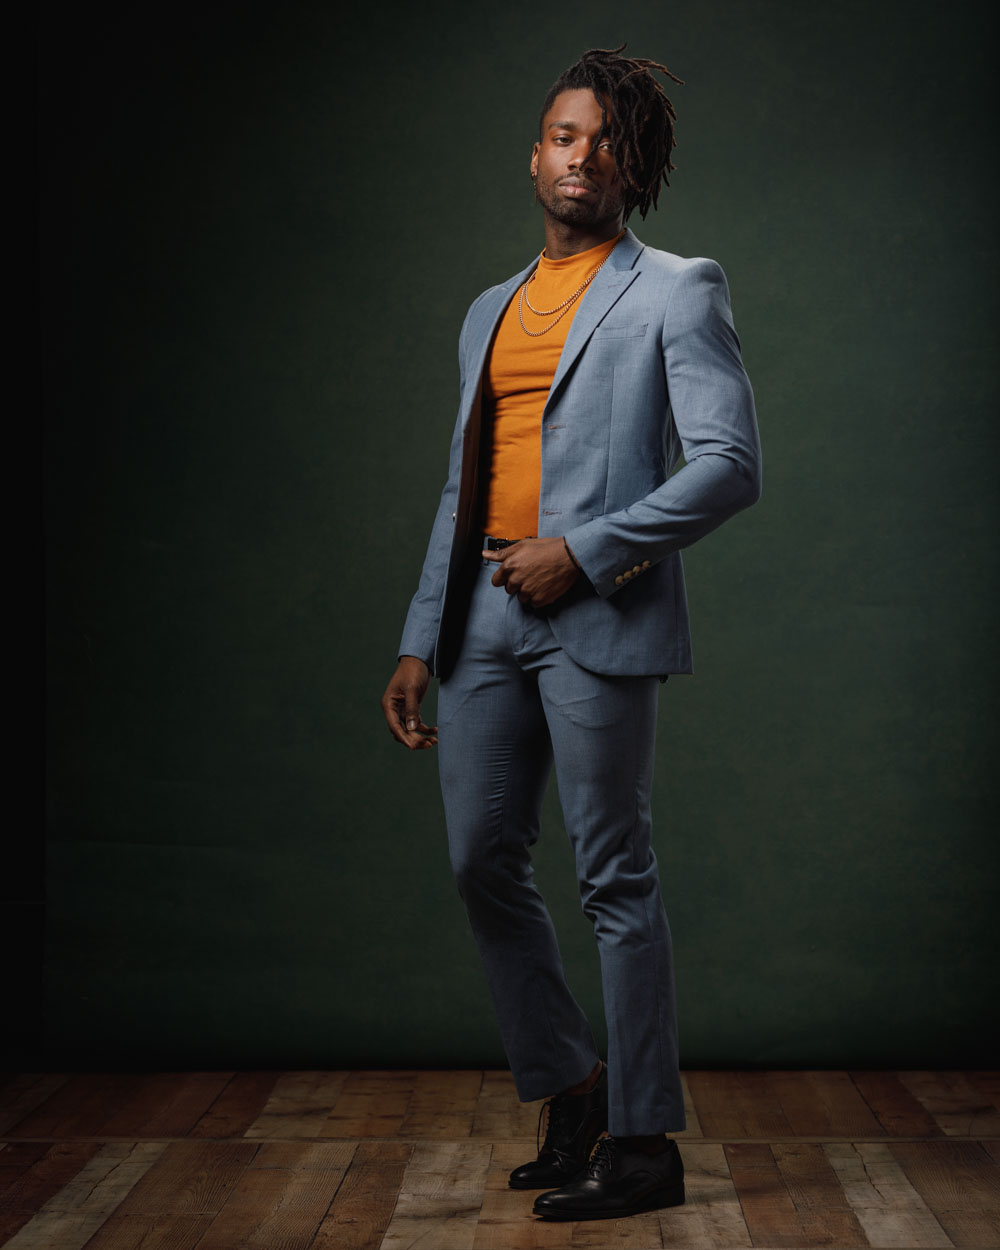 Prince in a blue suit and orange shirt in front of a green backdrop, exemplifying high-fashion model portfolio photography in Chicago by John Gress.